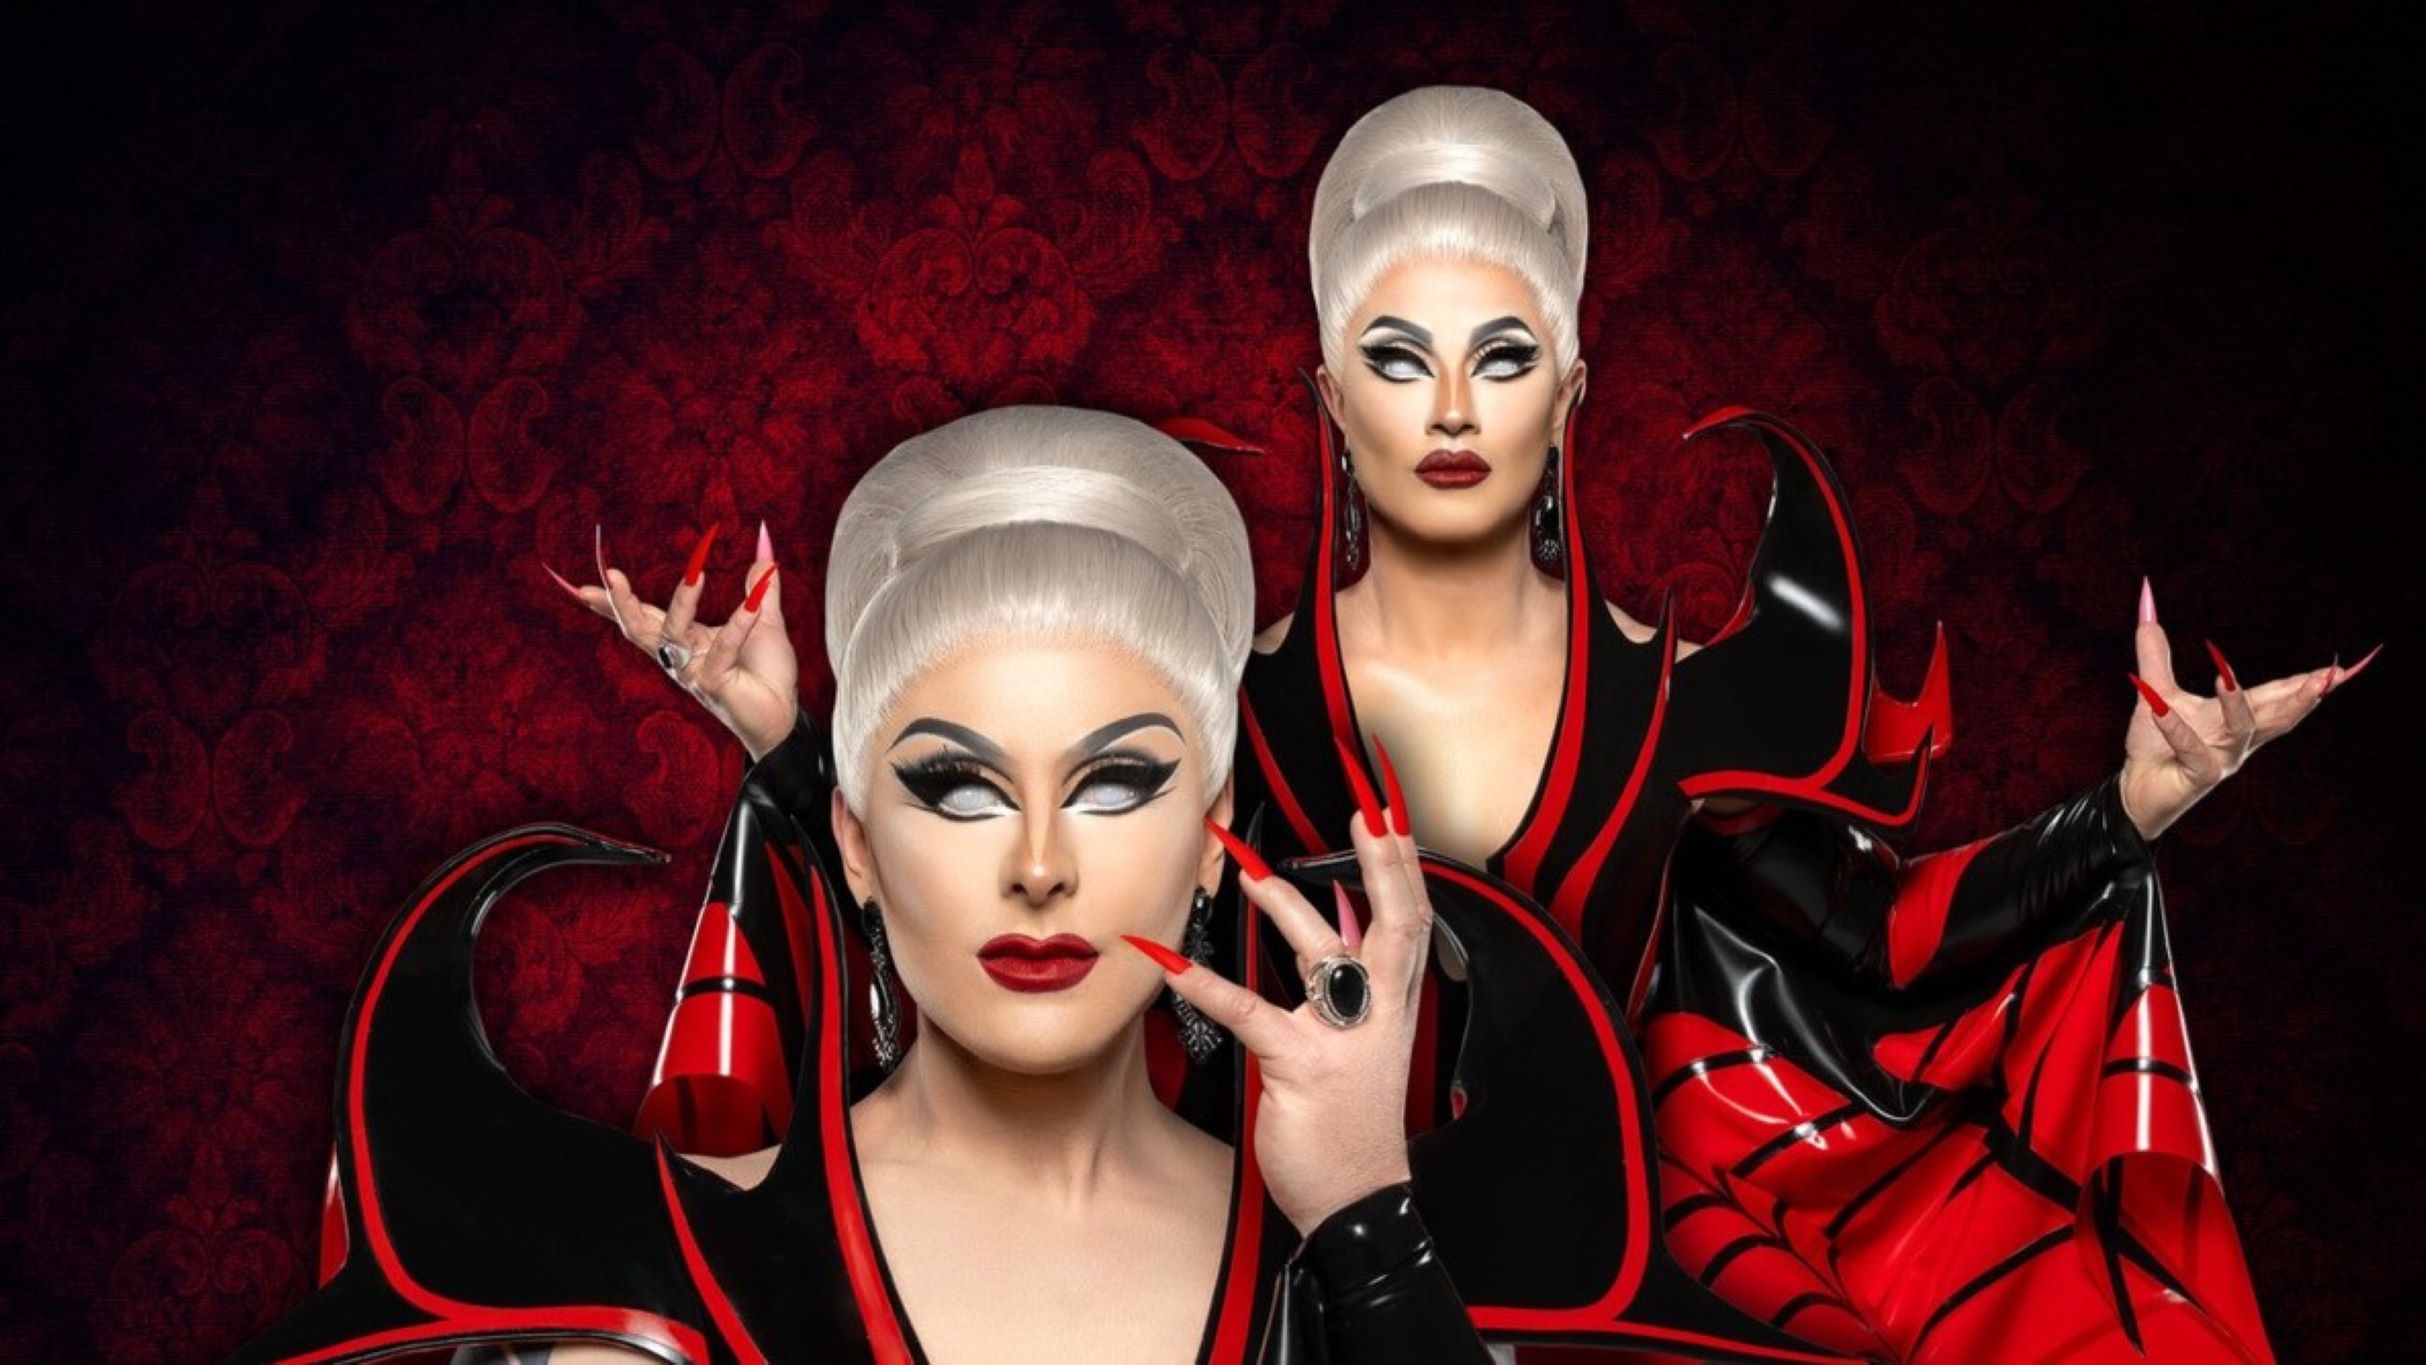 presale password for Boulet Brothers' Dragula: Season 5 Tour face value tickets in Atlanta at Buckhead Theatre